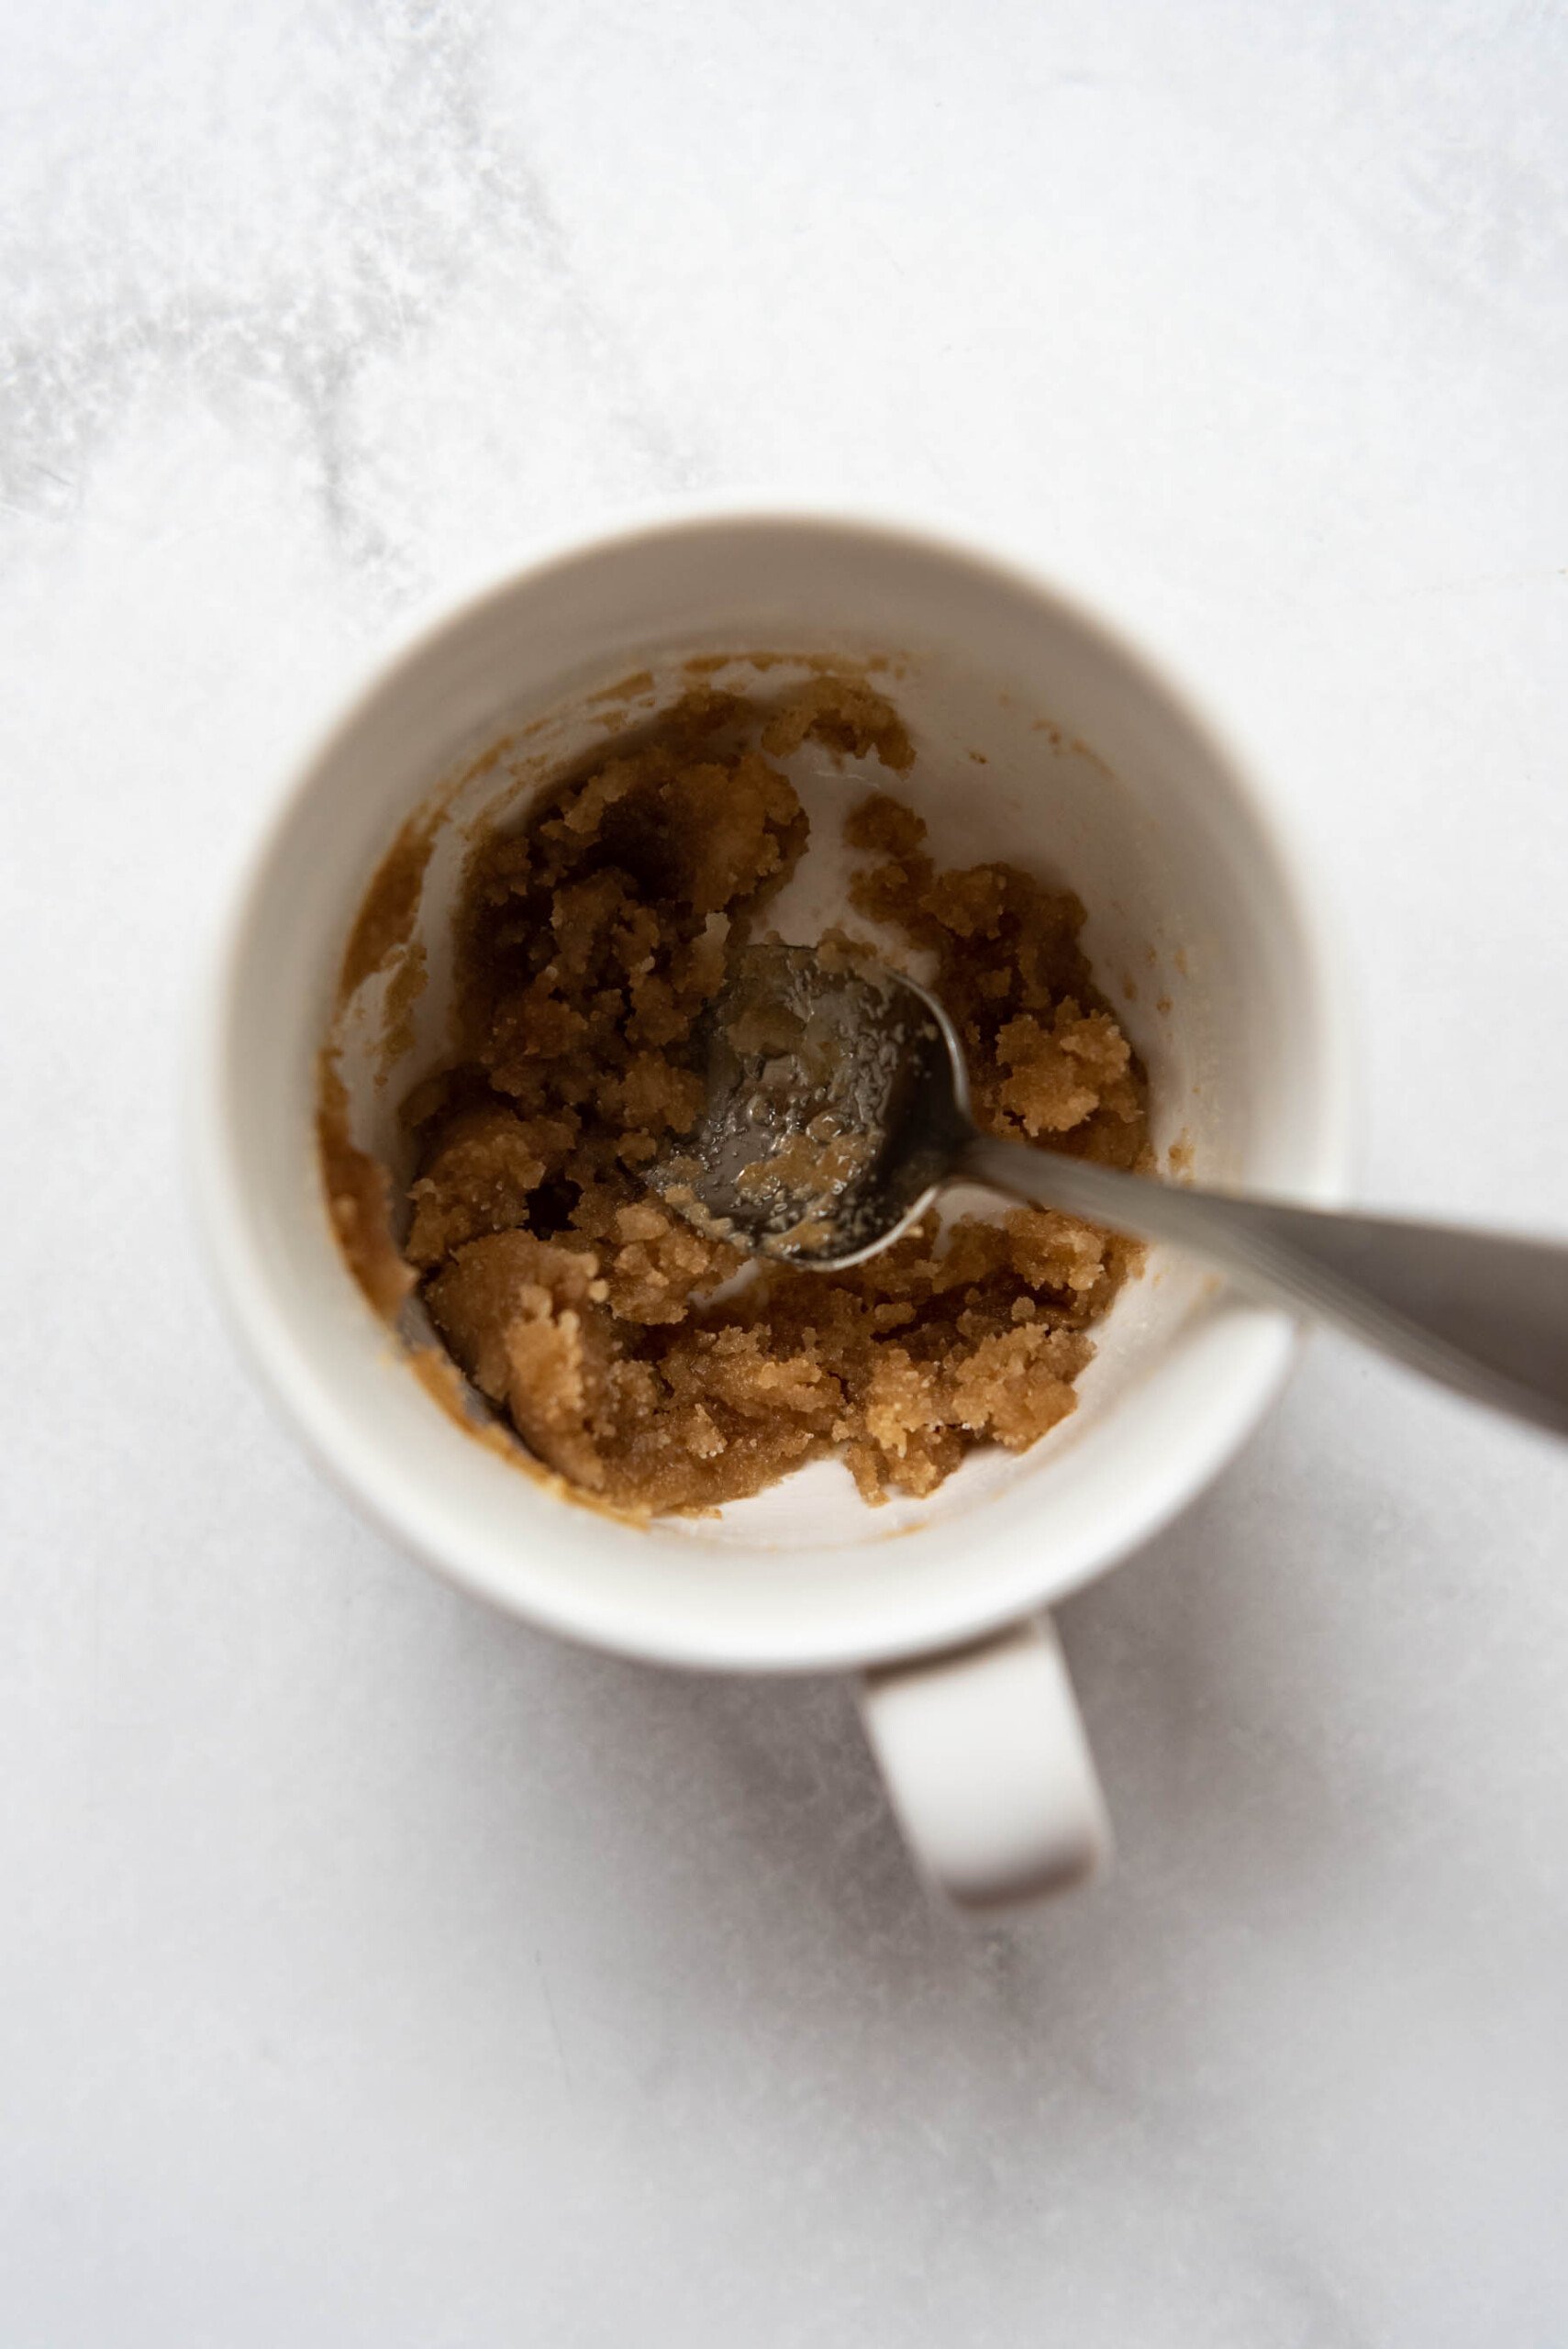 Stirring butter and sugars together with a spoon in a white mug.